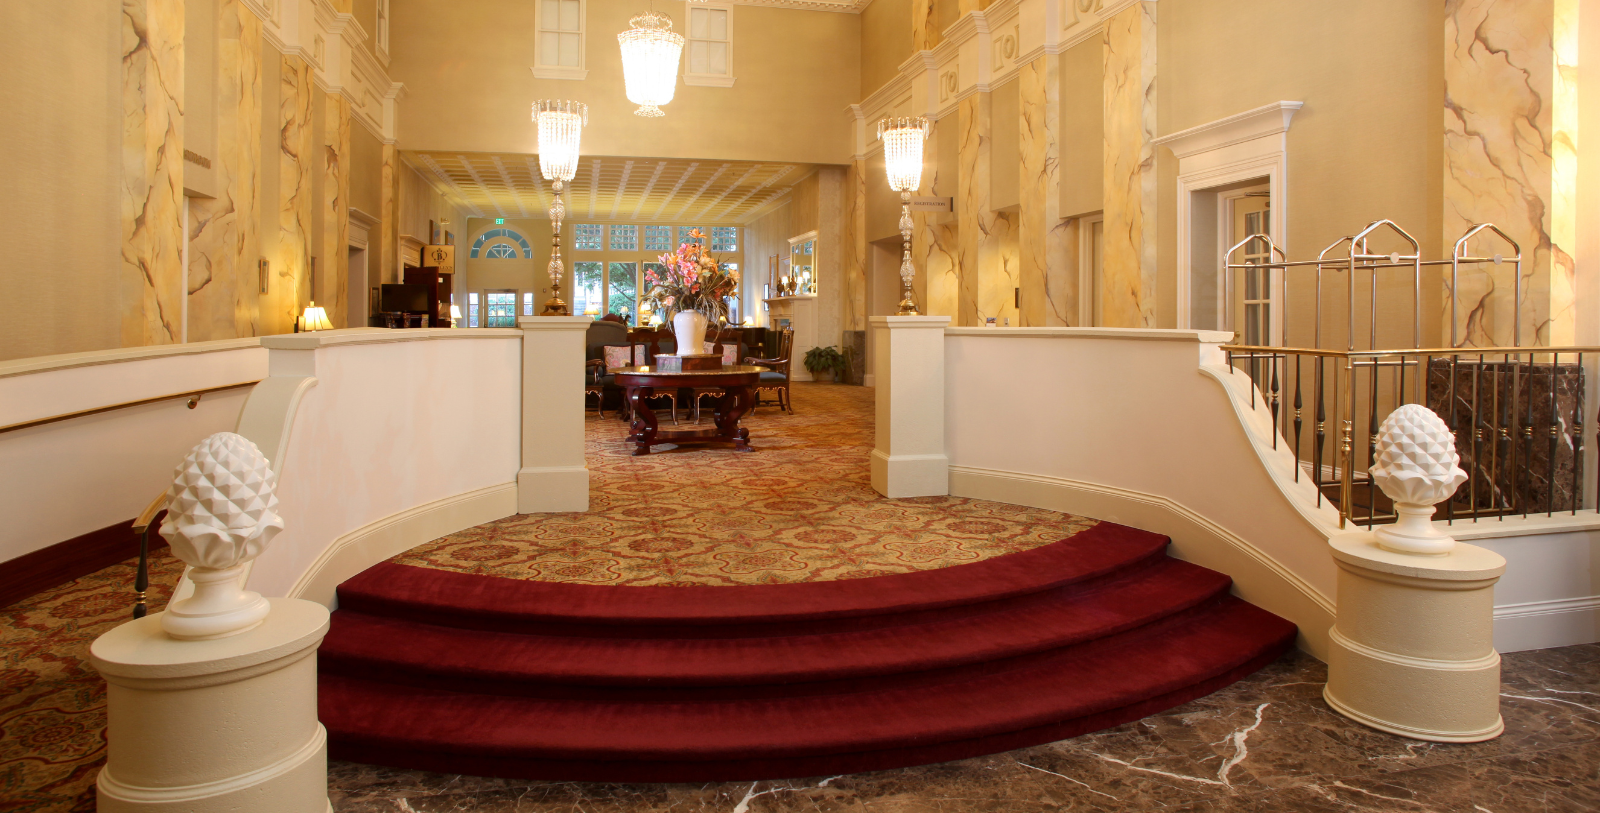 Discover the Victorian architecture of the General Morgan Inn & Conference Center.